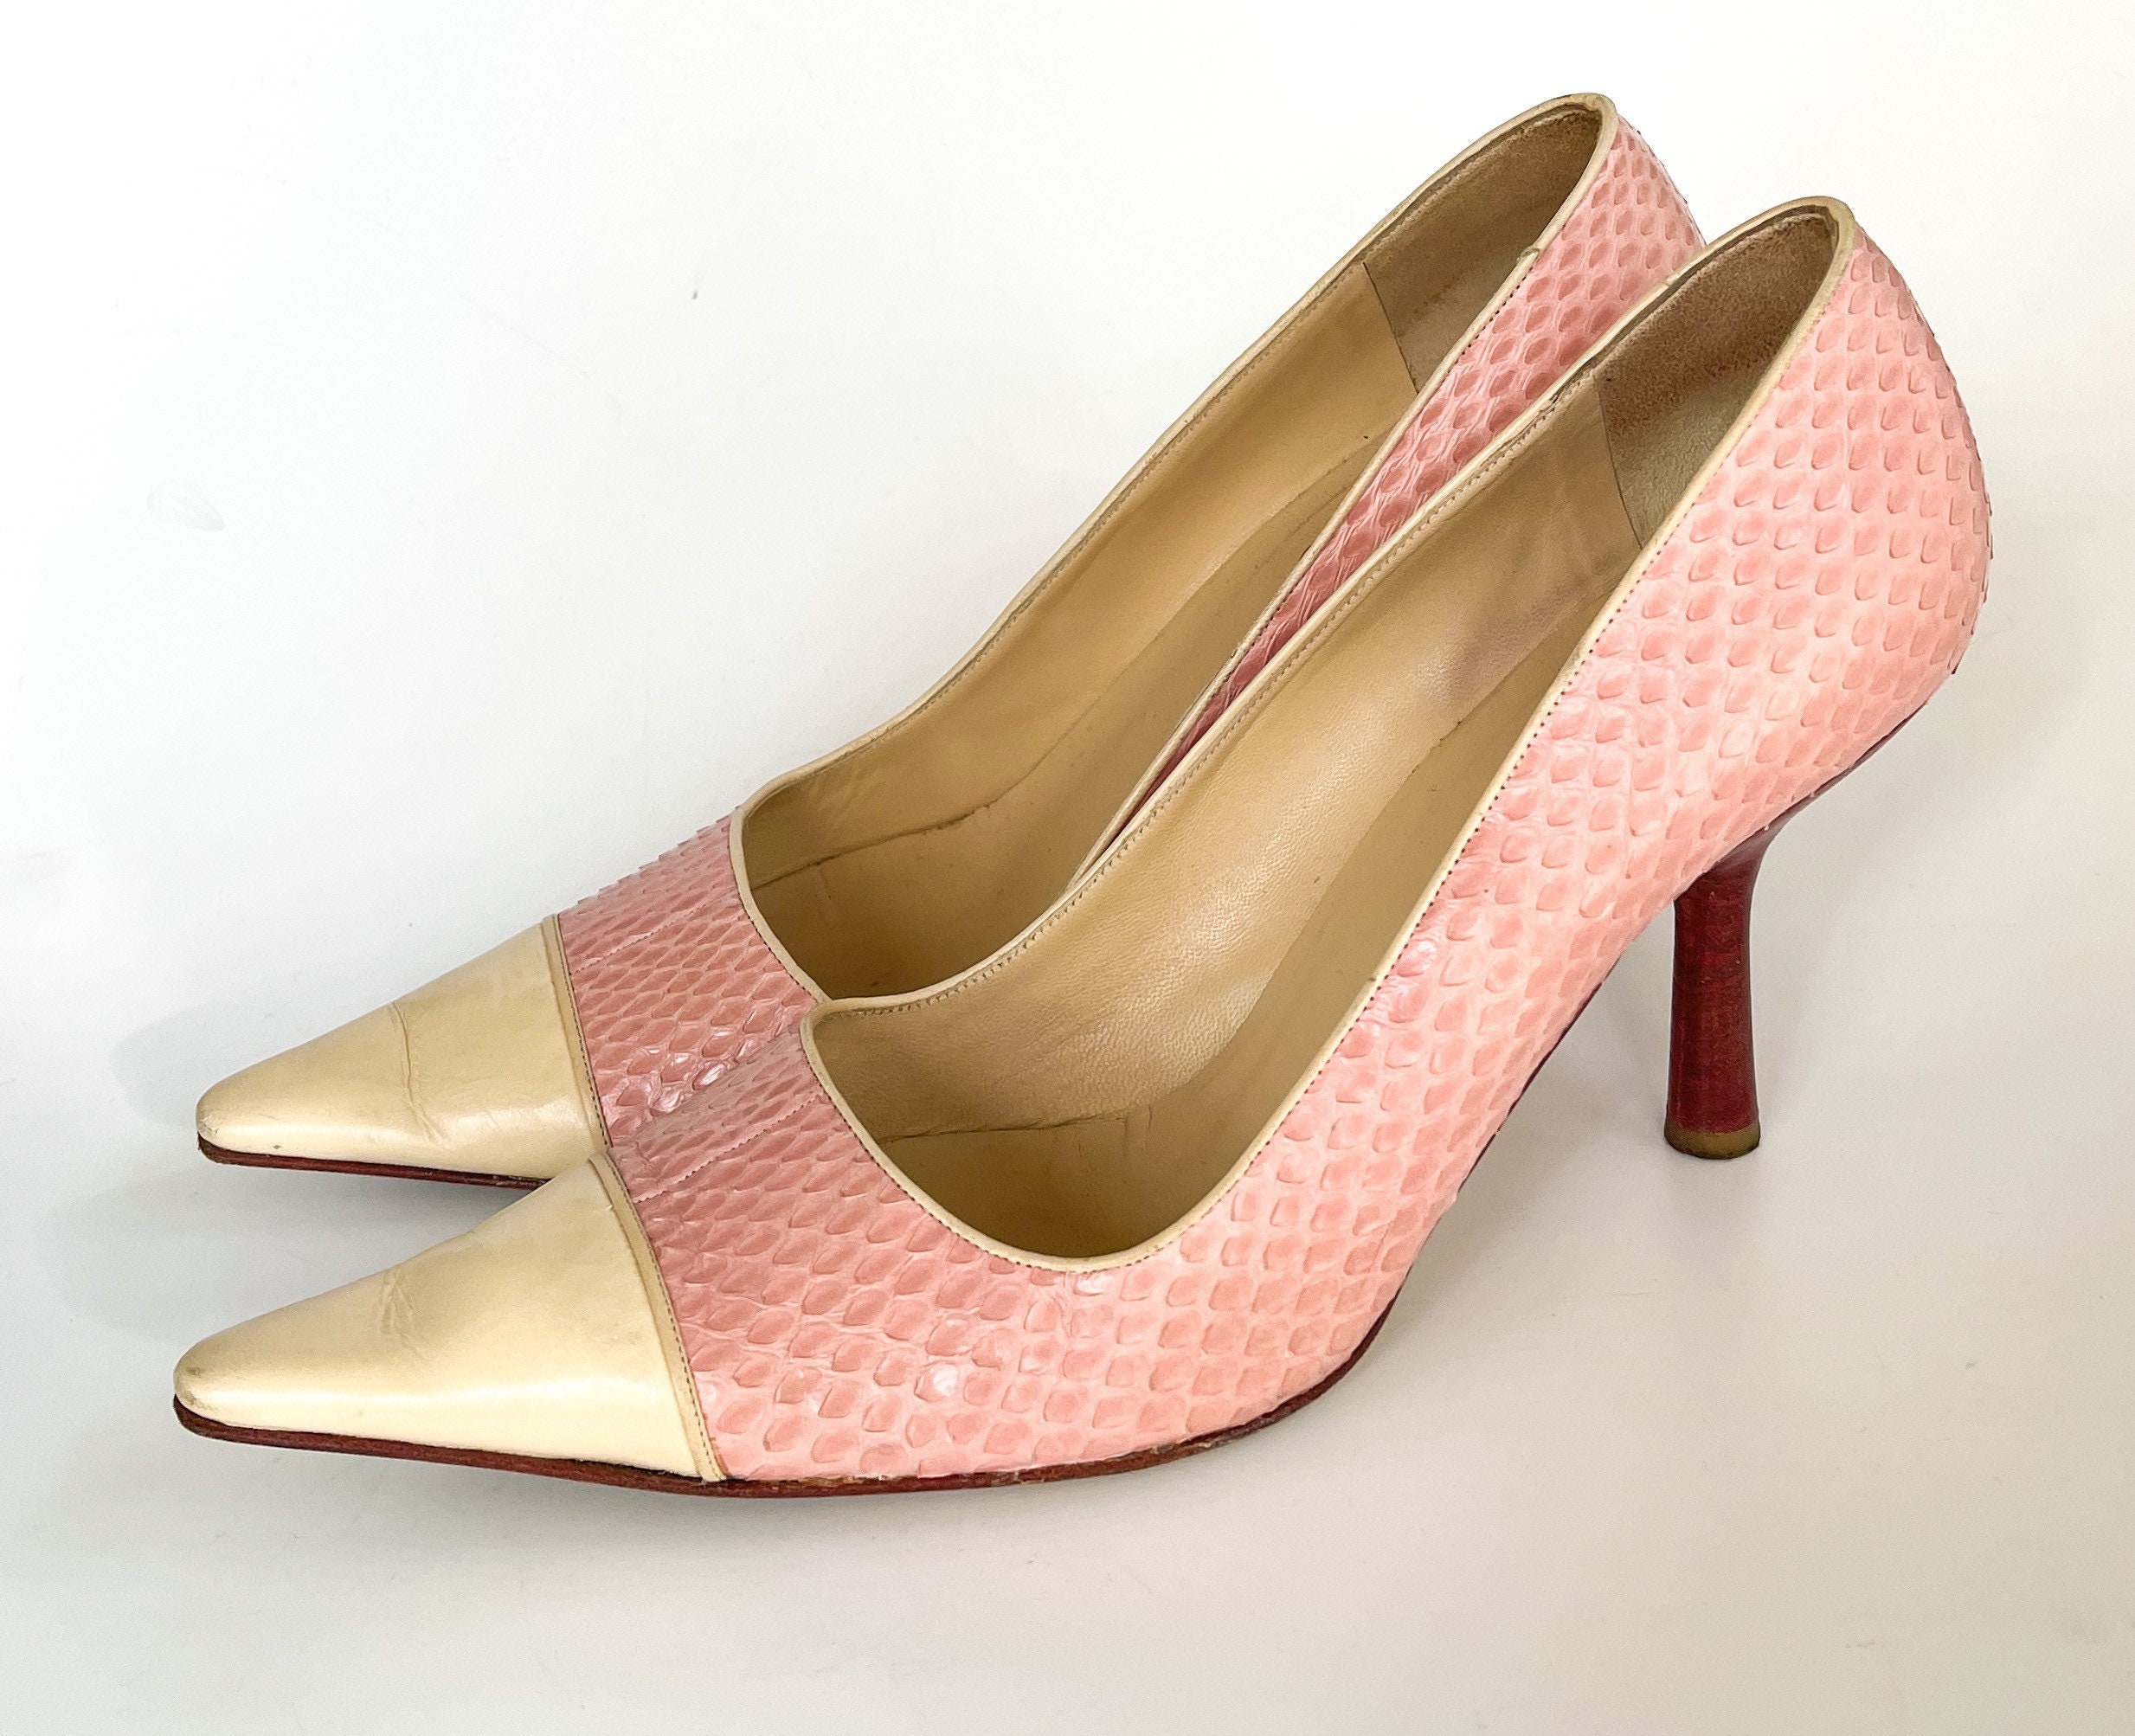 New Chanel Beige Cream Pink Leather Slings Classic Heels Shoes 39